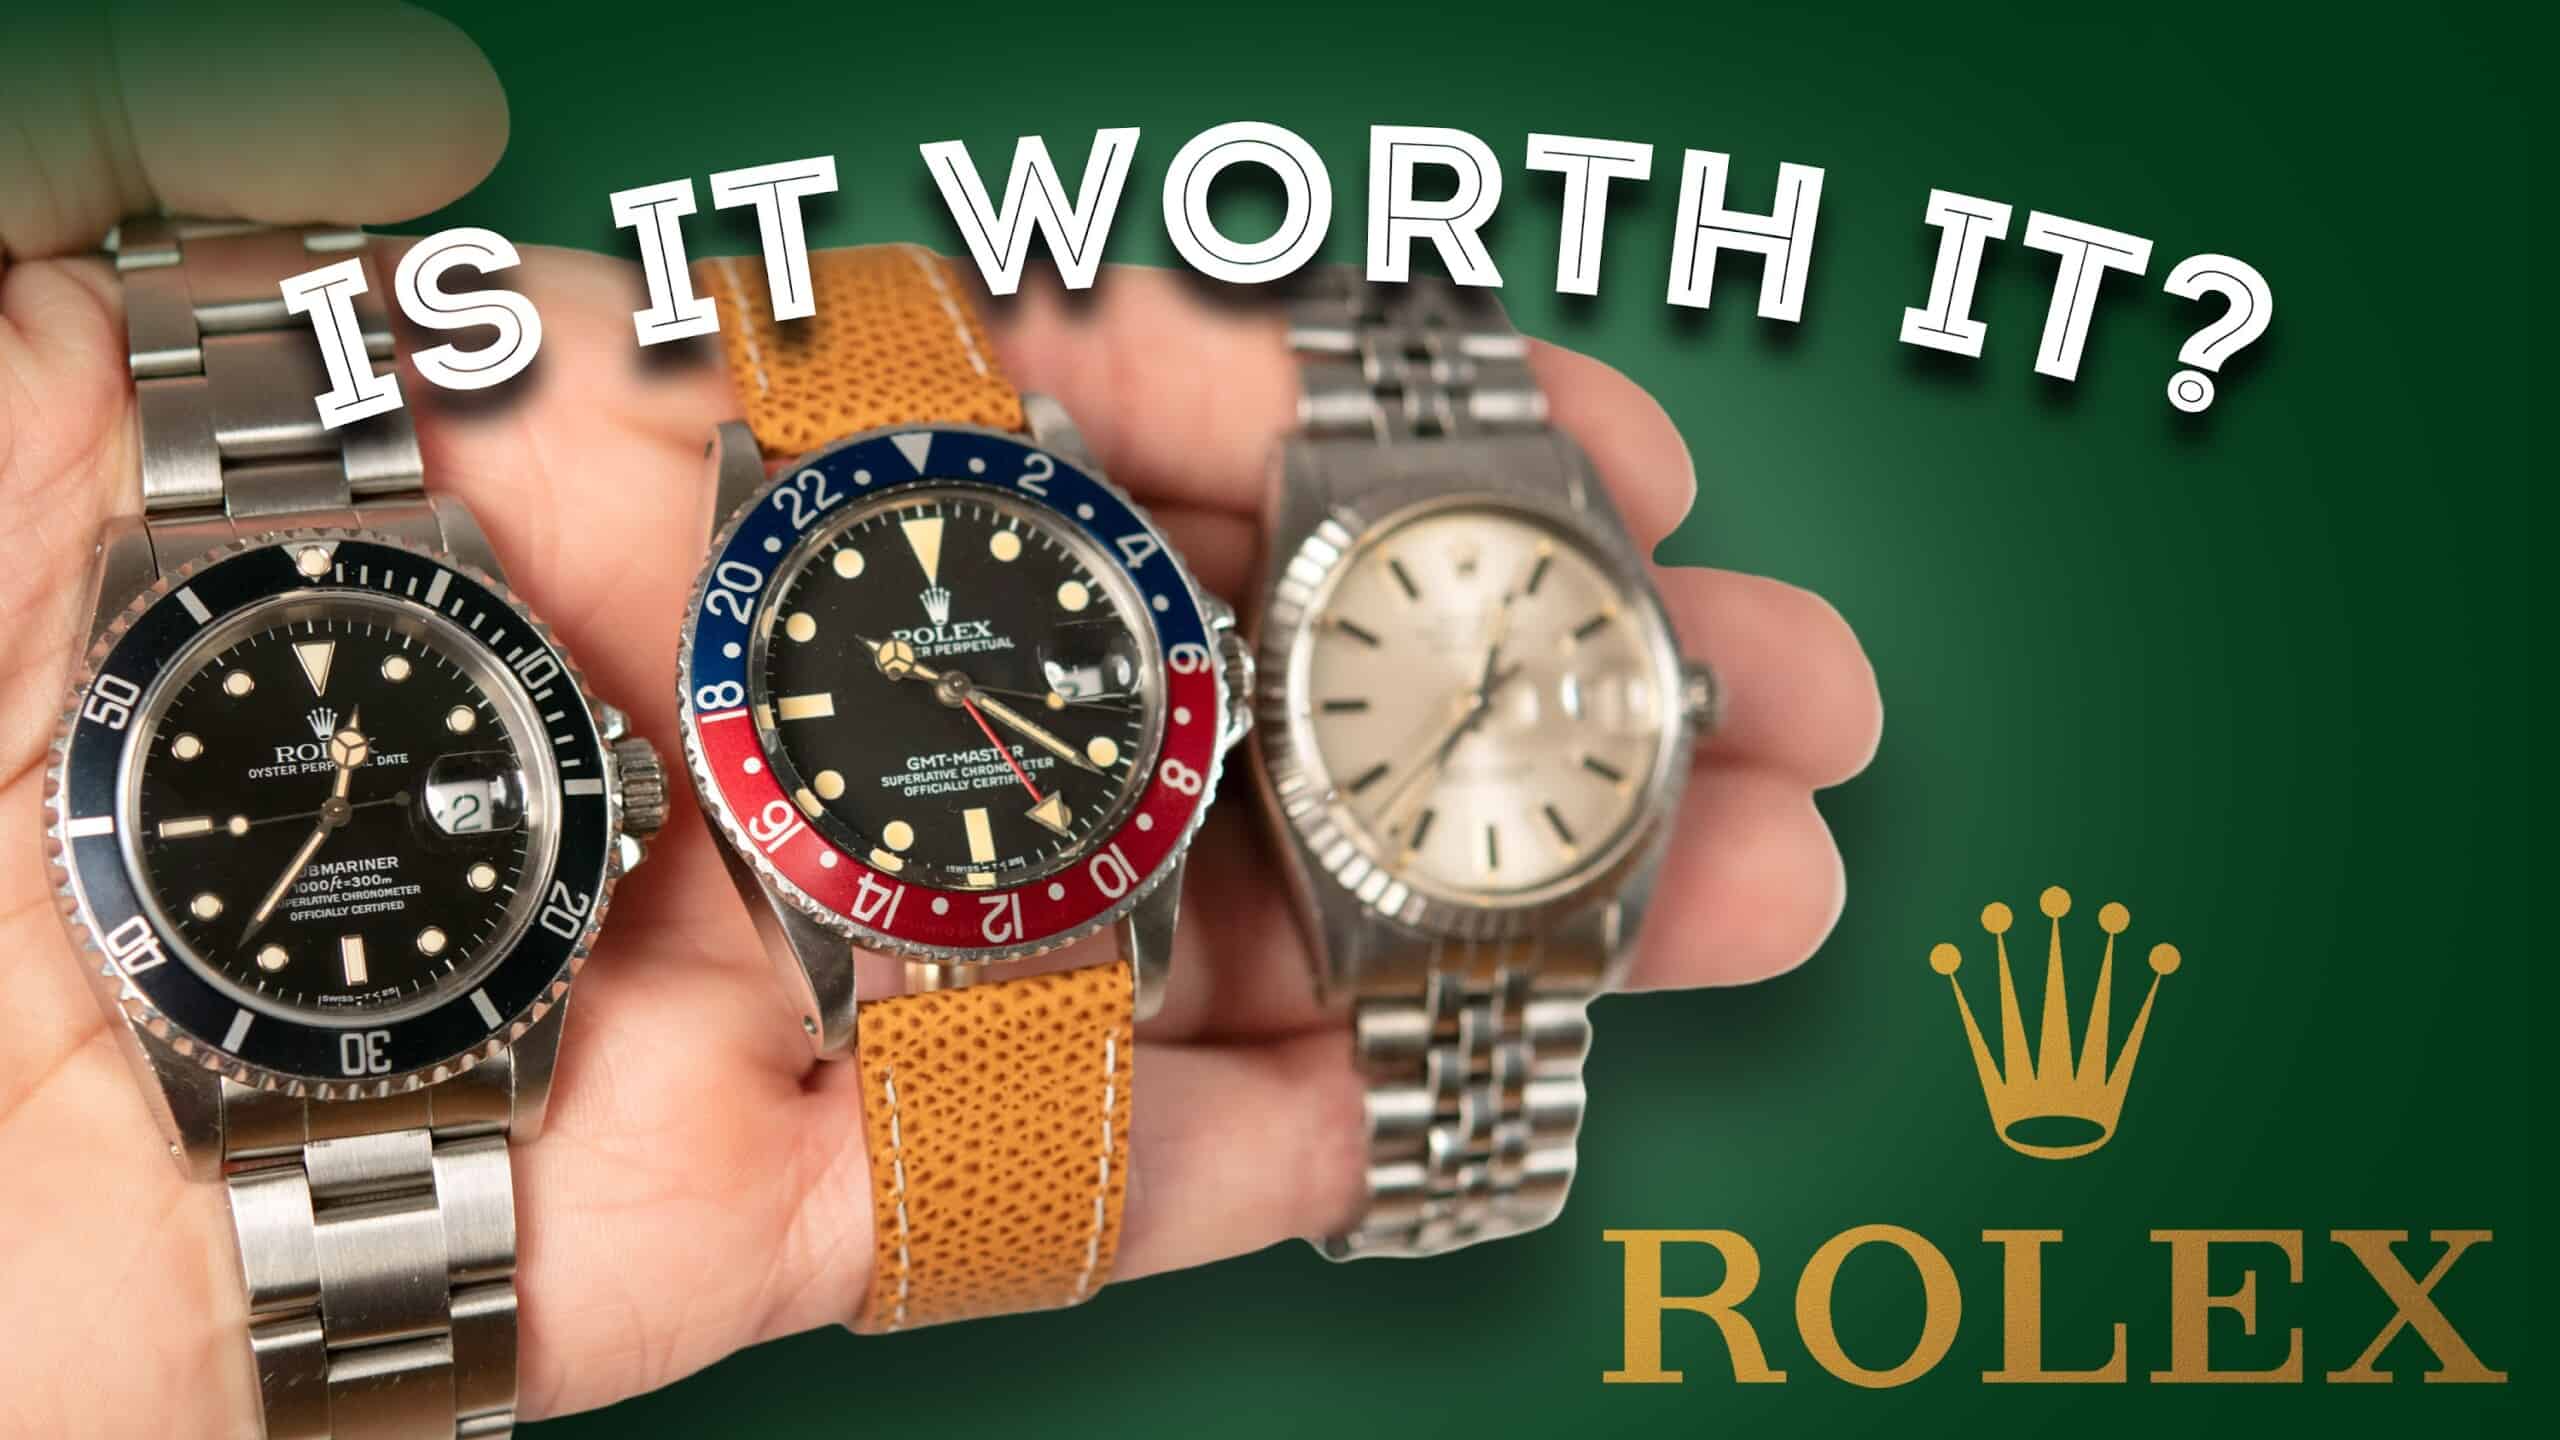 Watches: Are They Worth It? Men's Watch Review - Datejust, Submariner, GMT Master